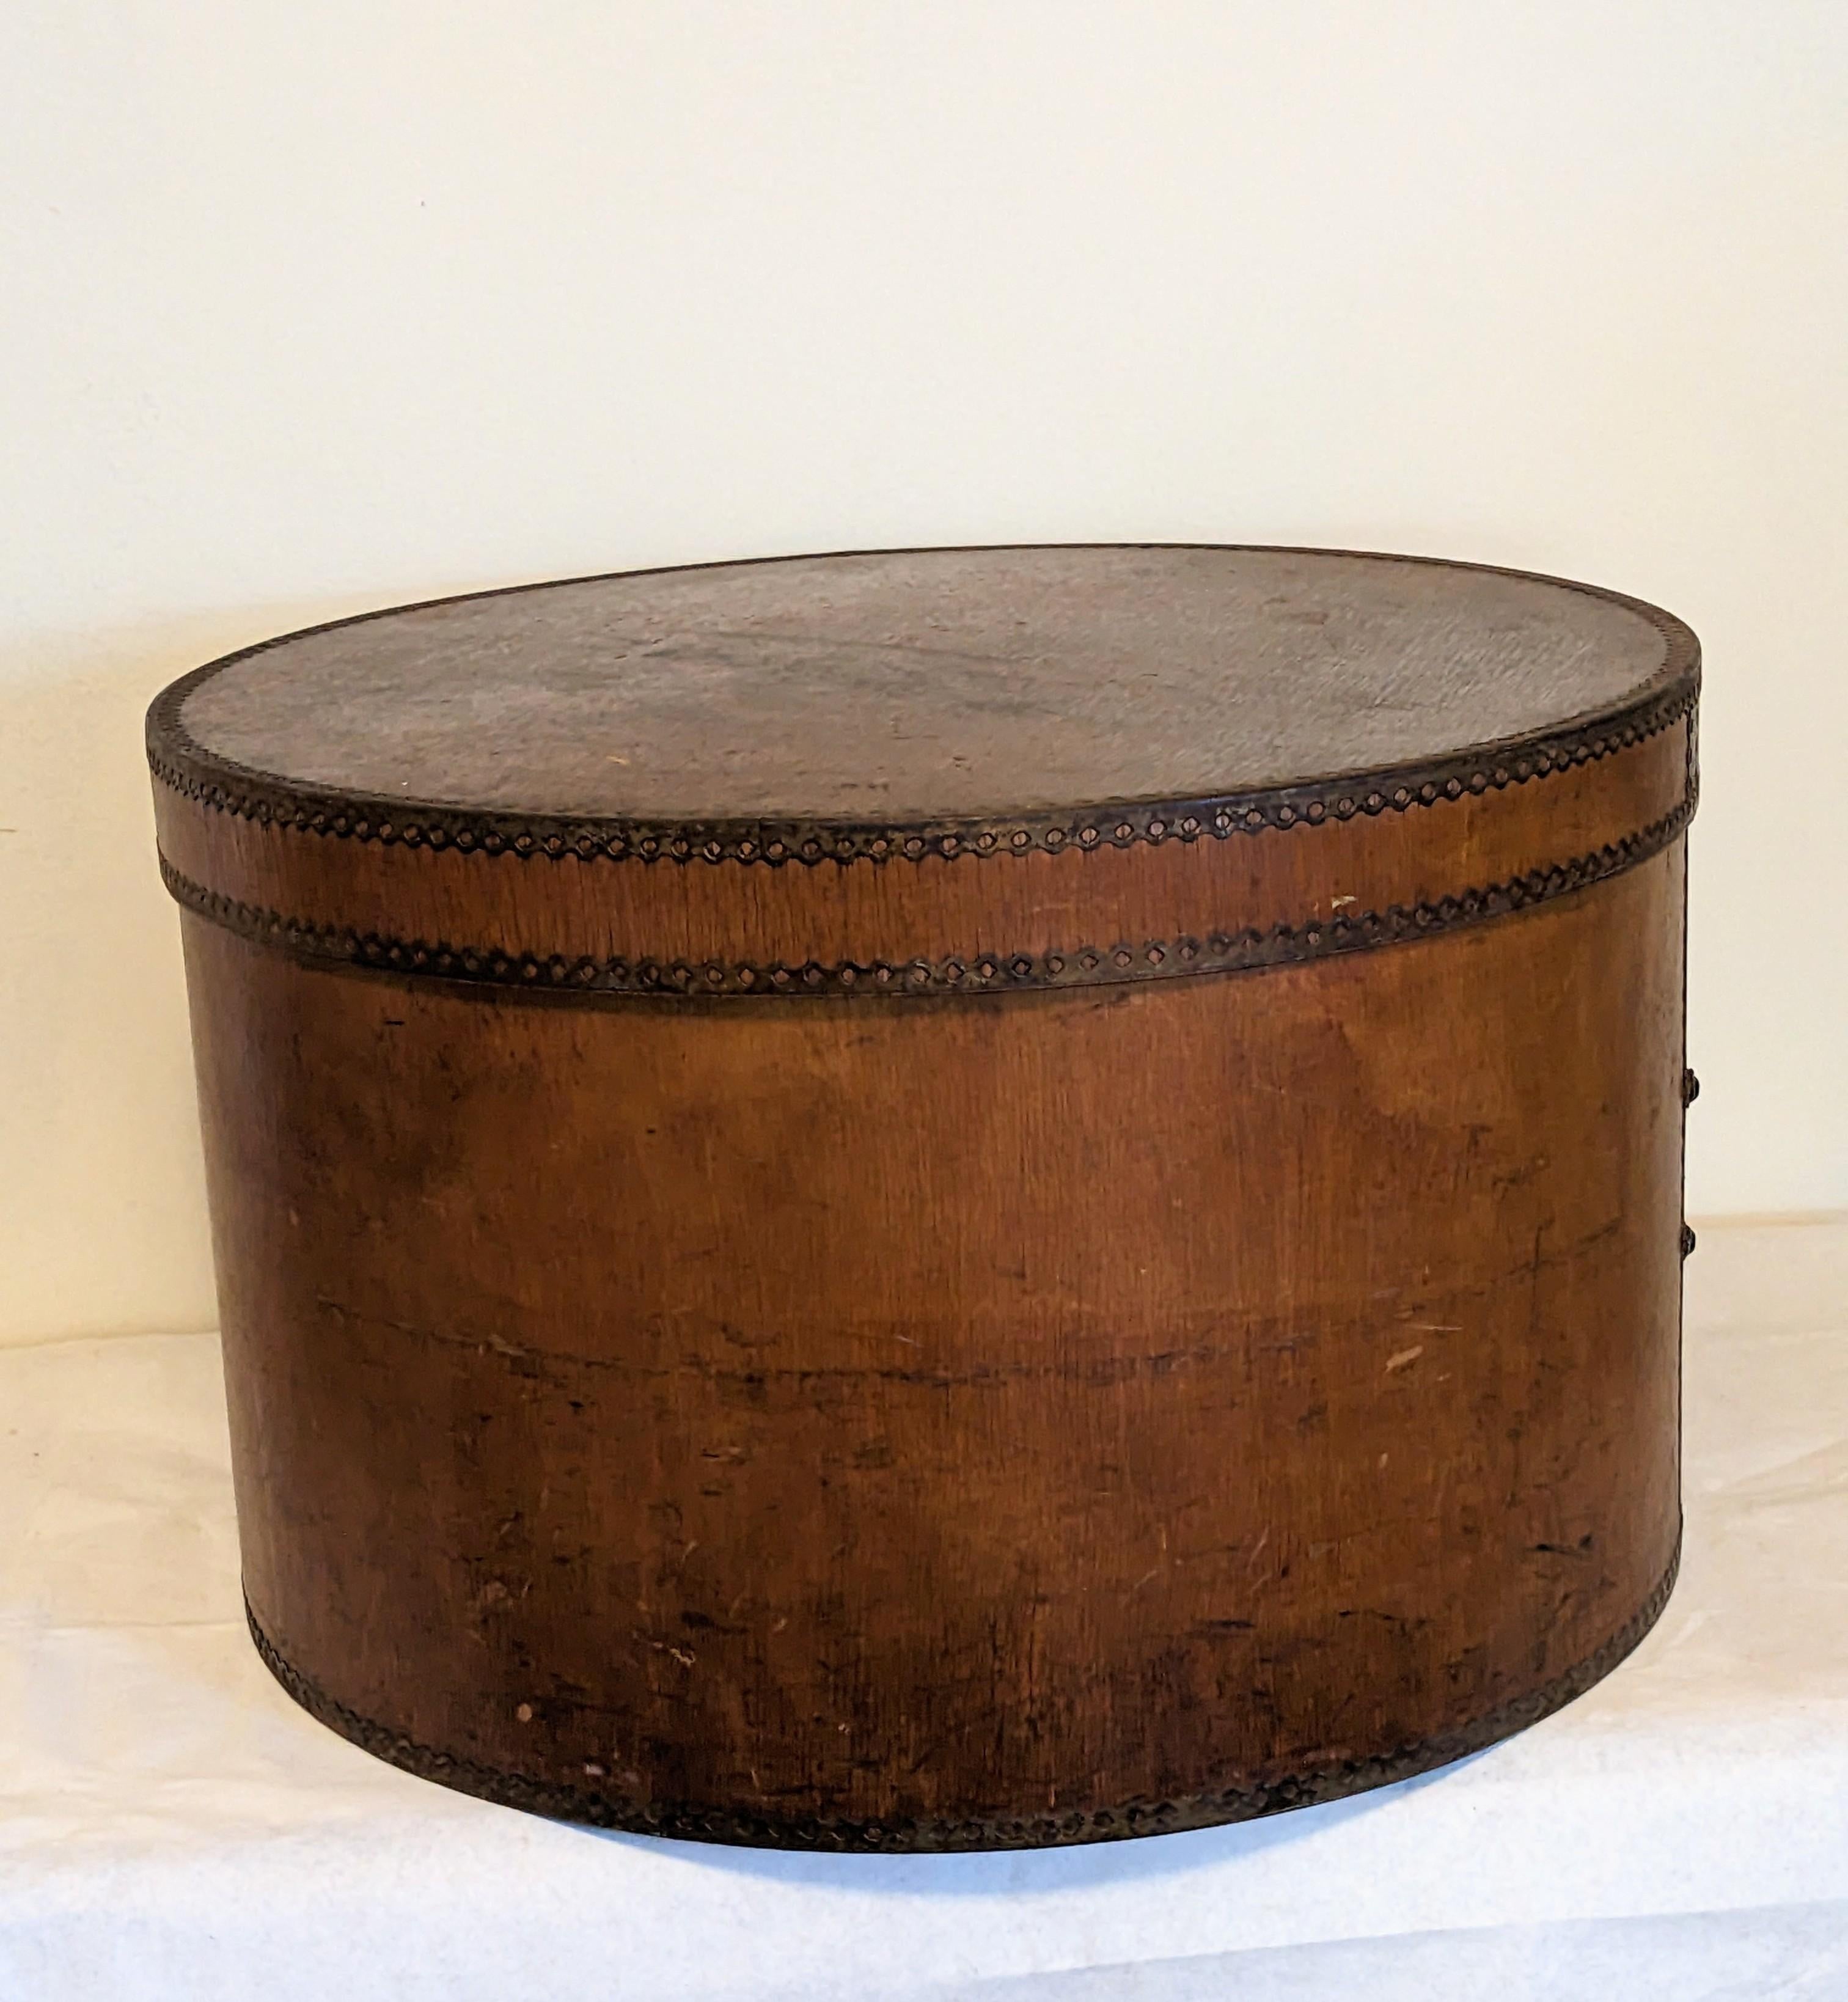 Wonderful Edwardian Bent Wood Hat Box with metal riveted banding for support on all edges. Great for storage, European Early 1900's. 18